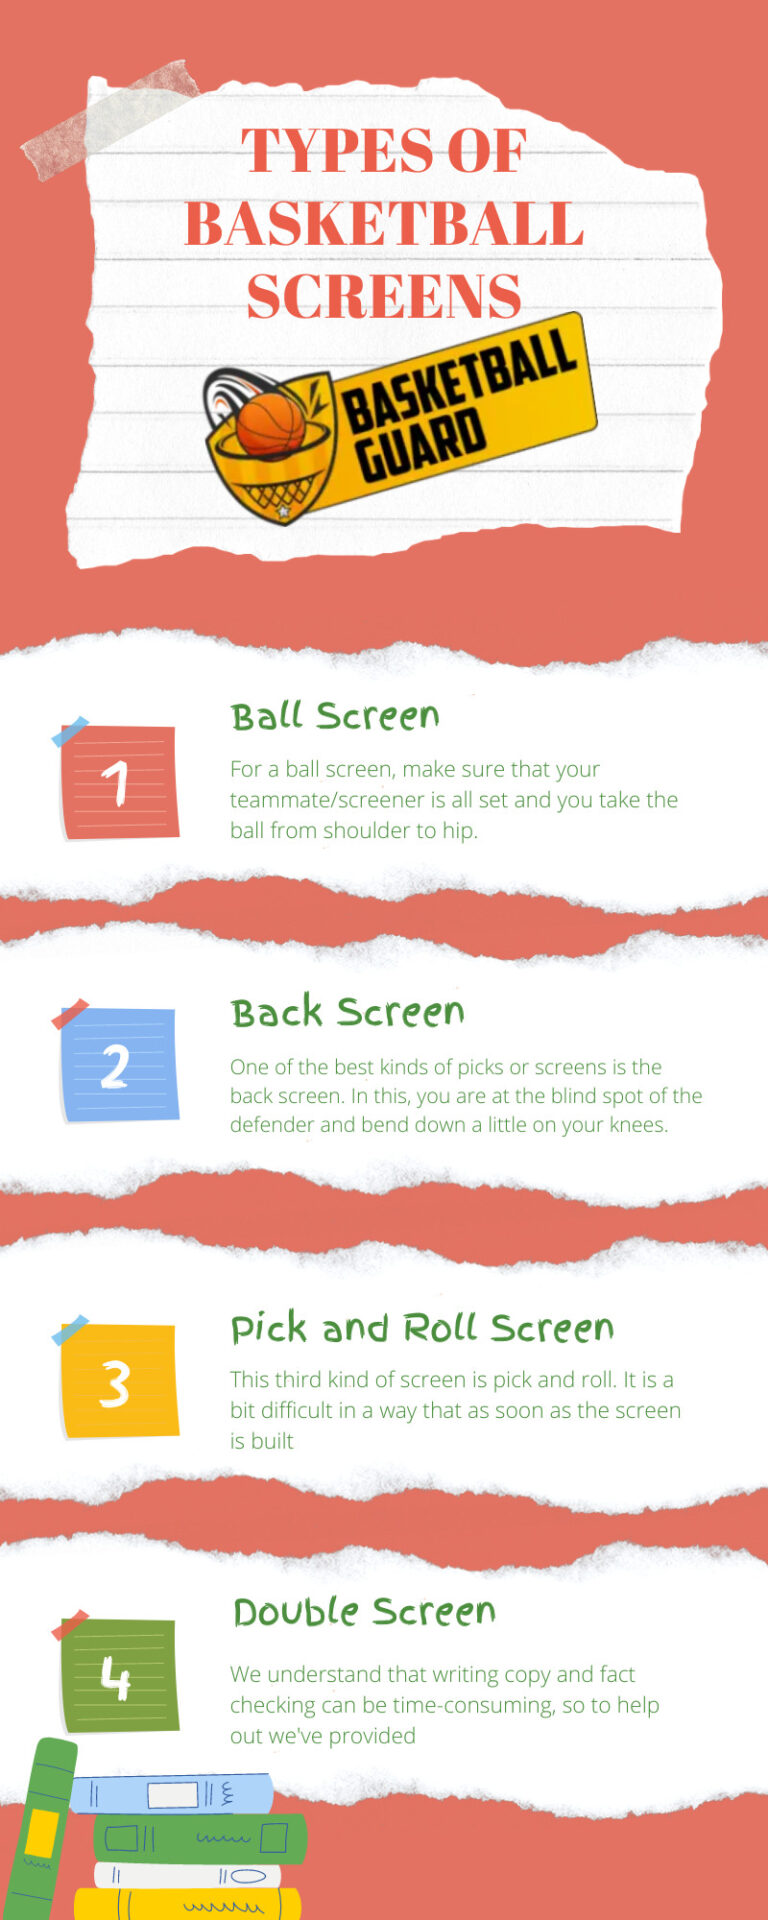 Types of Basketball Screens